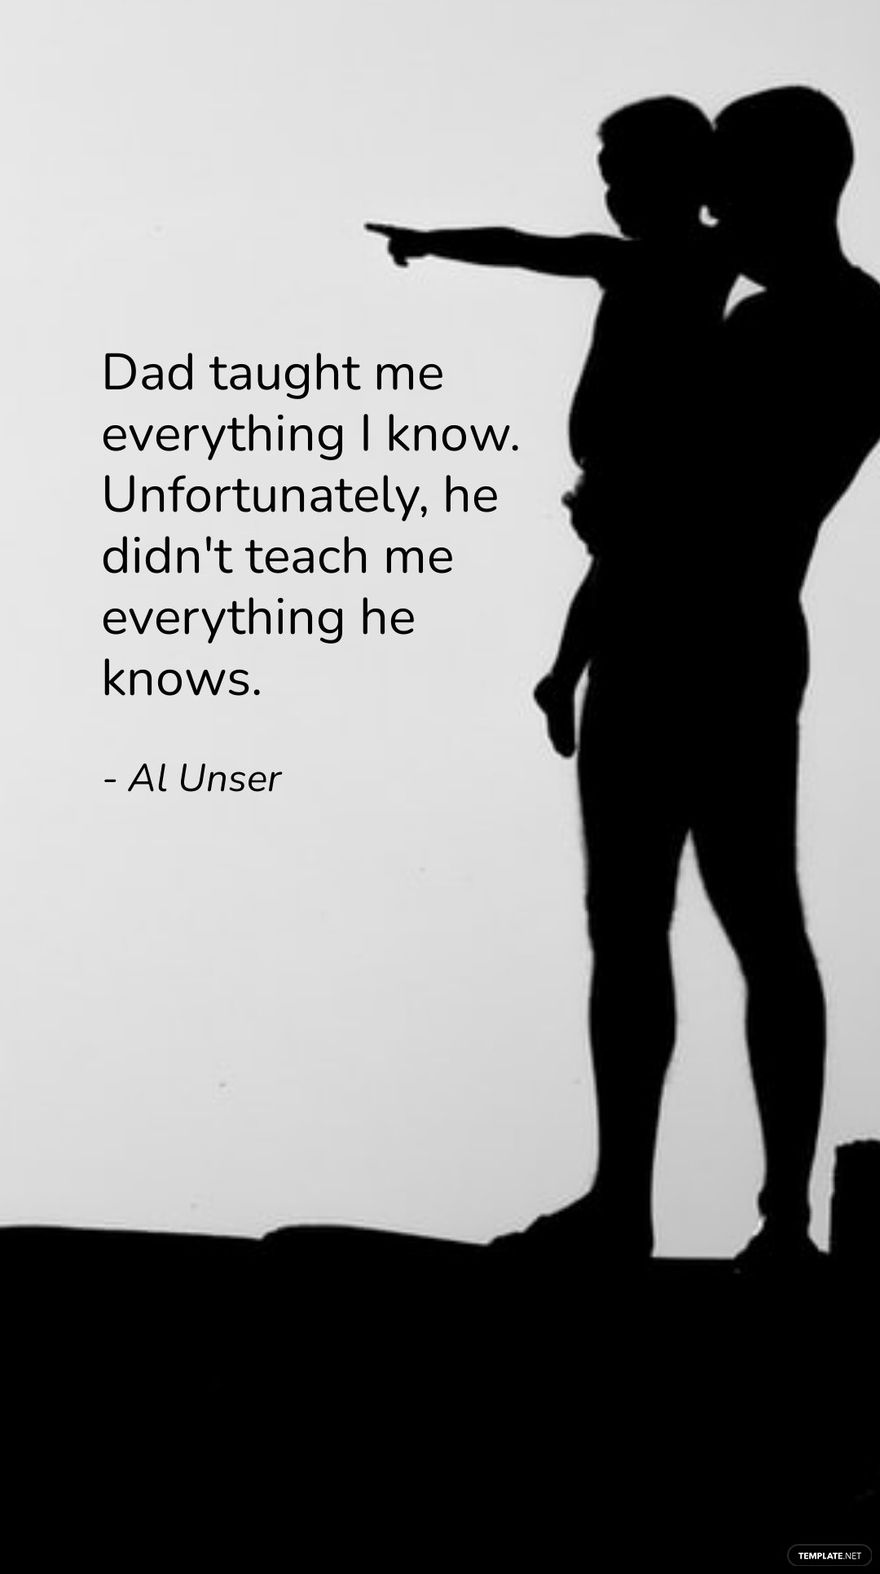 Al Unser - Dad taught me everything I know. Unfortunately, he didn't teach me everything he knows.